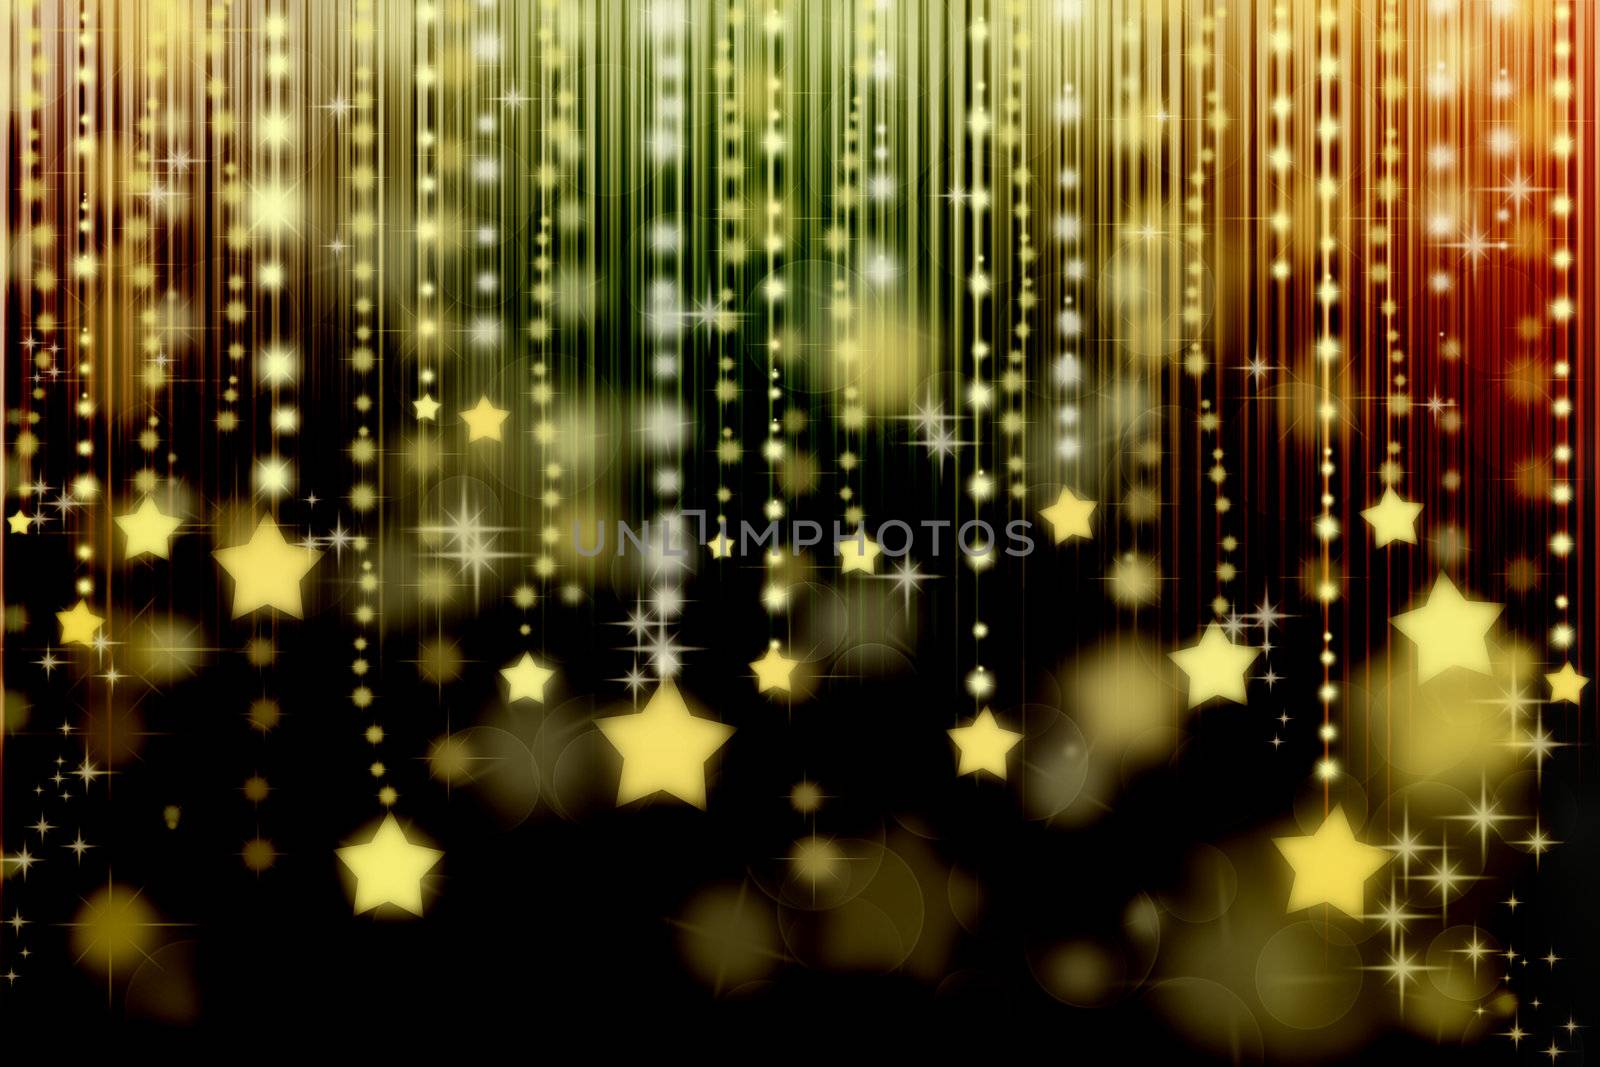 Stars on black abstract background with bokeh lights